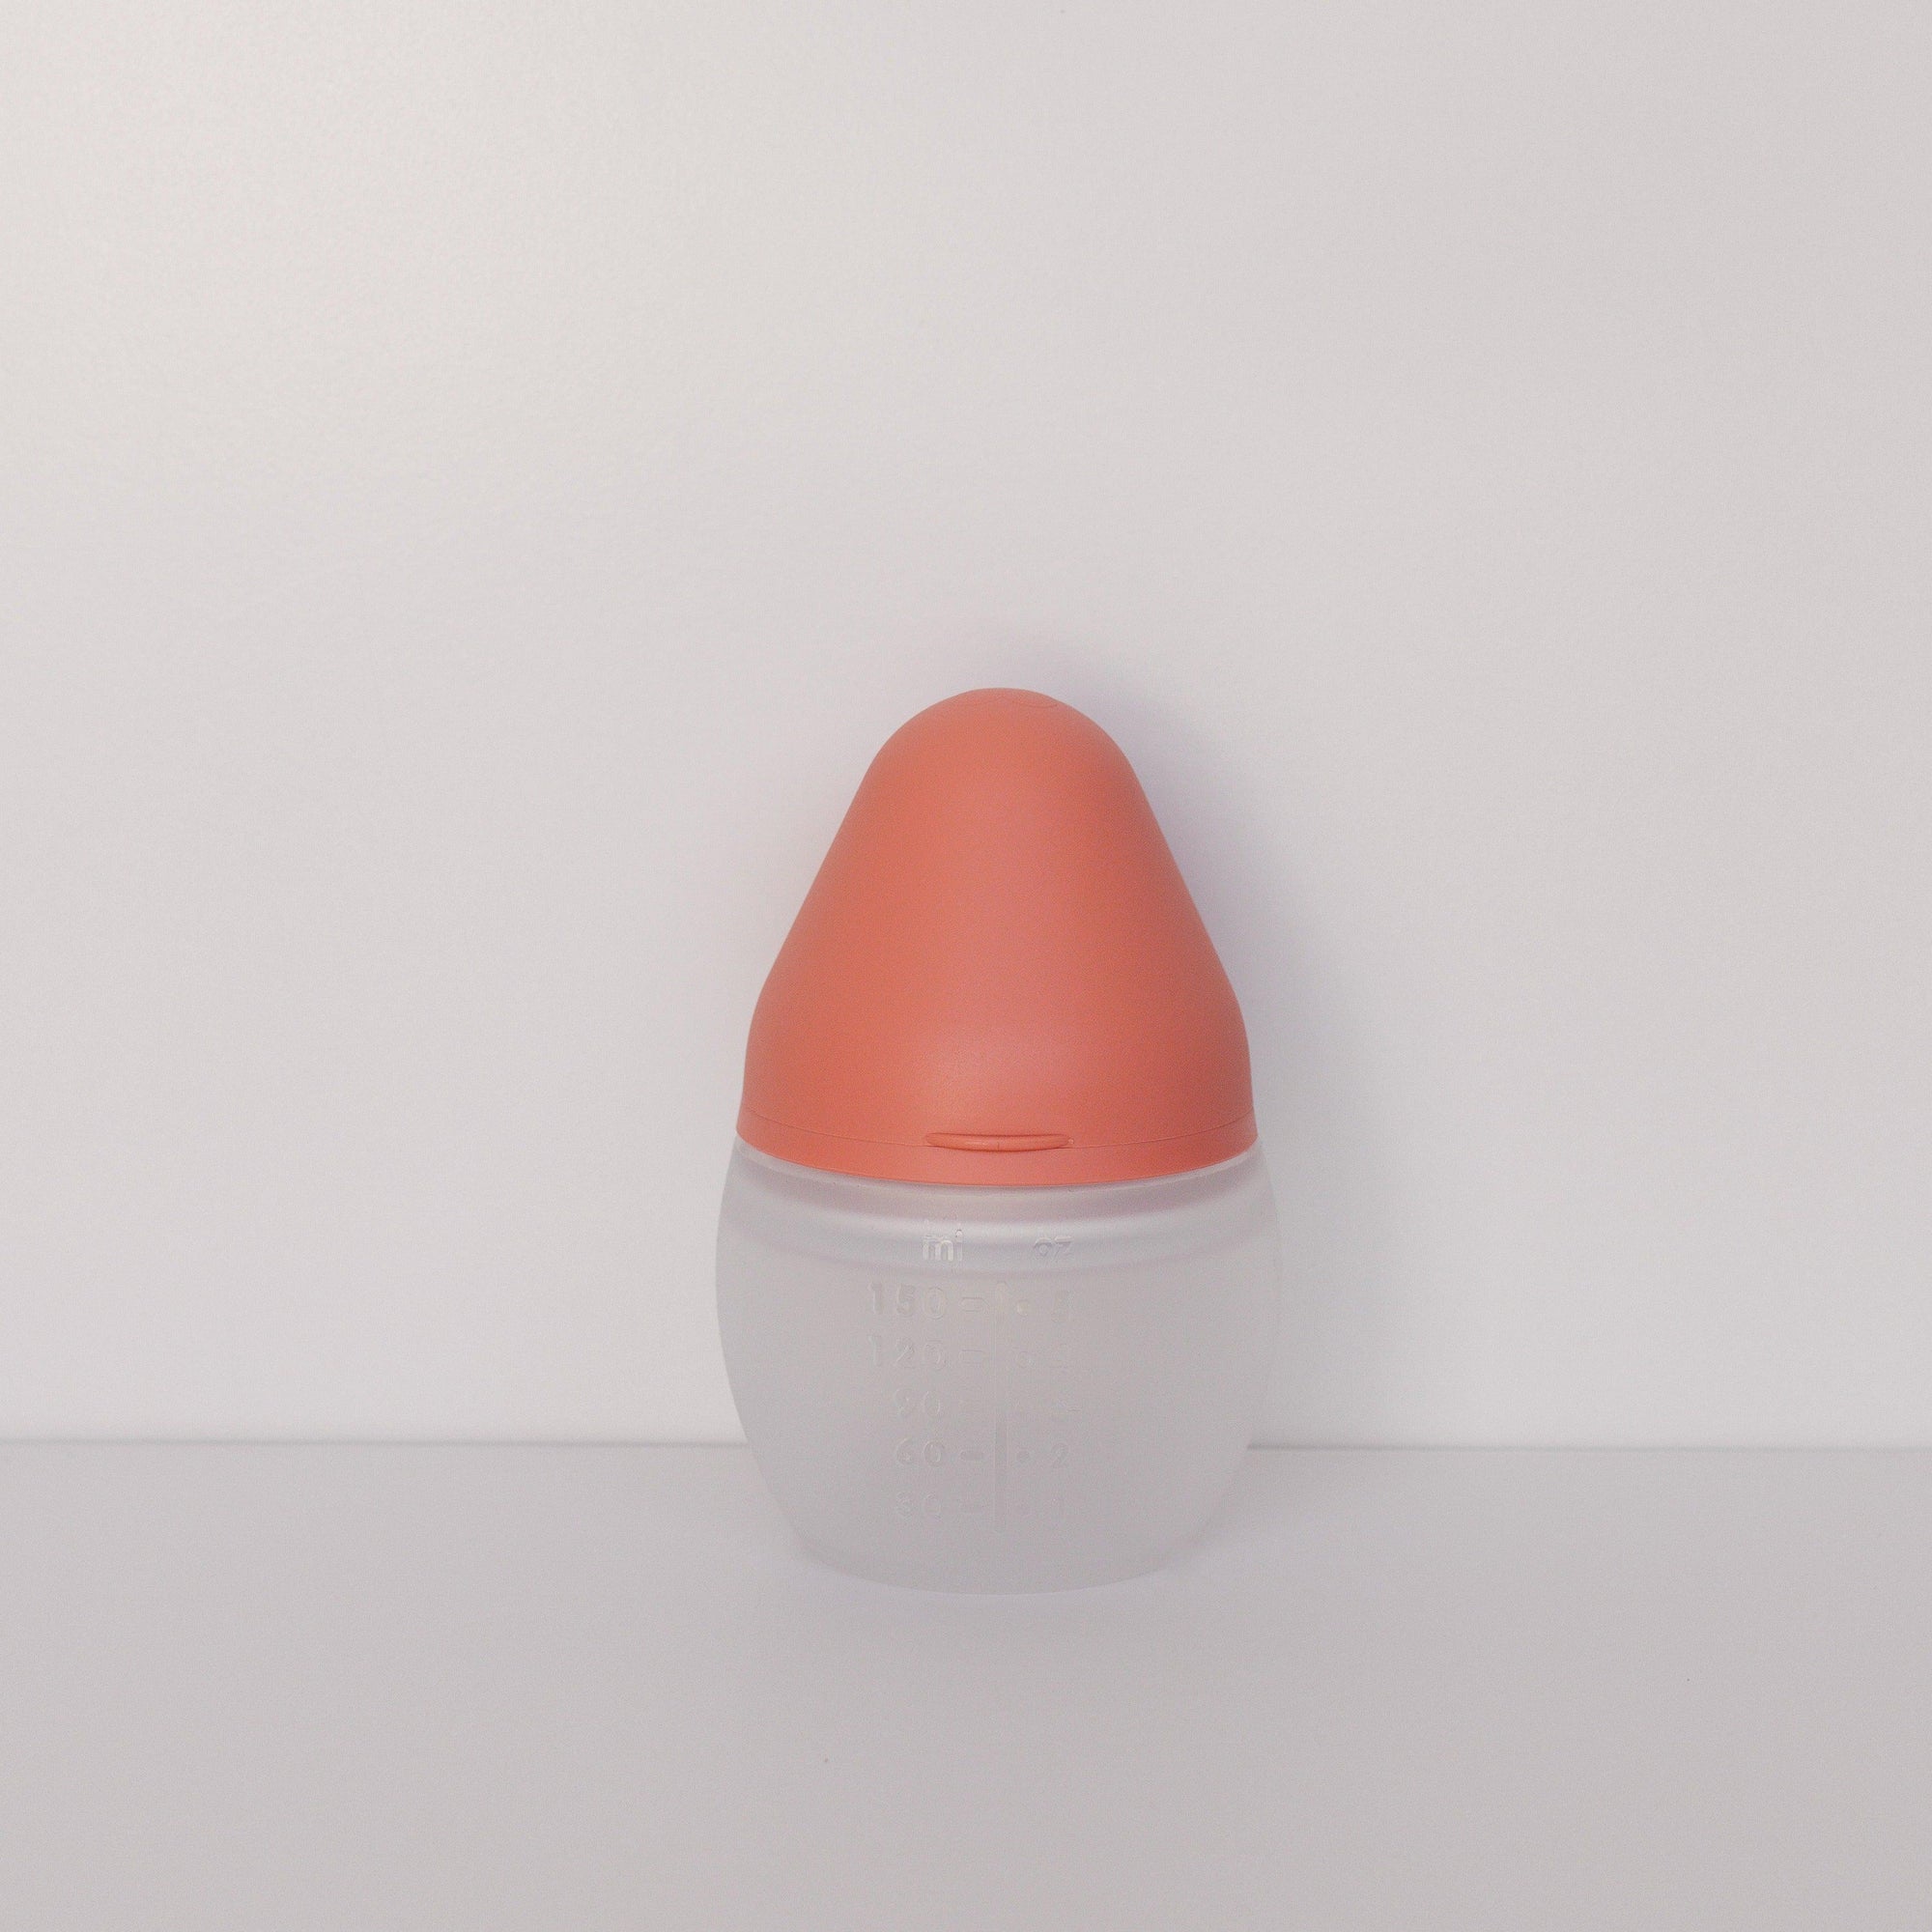 A BibRond summer coral baby bottle by Elhée France standing on a white surface.